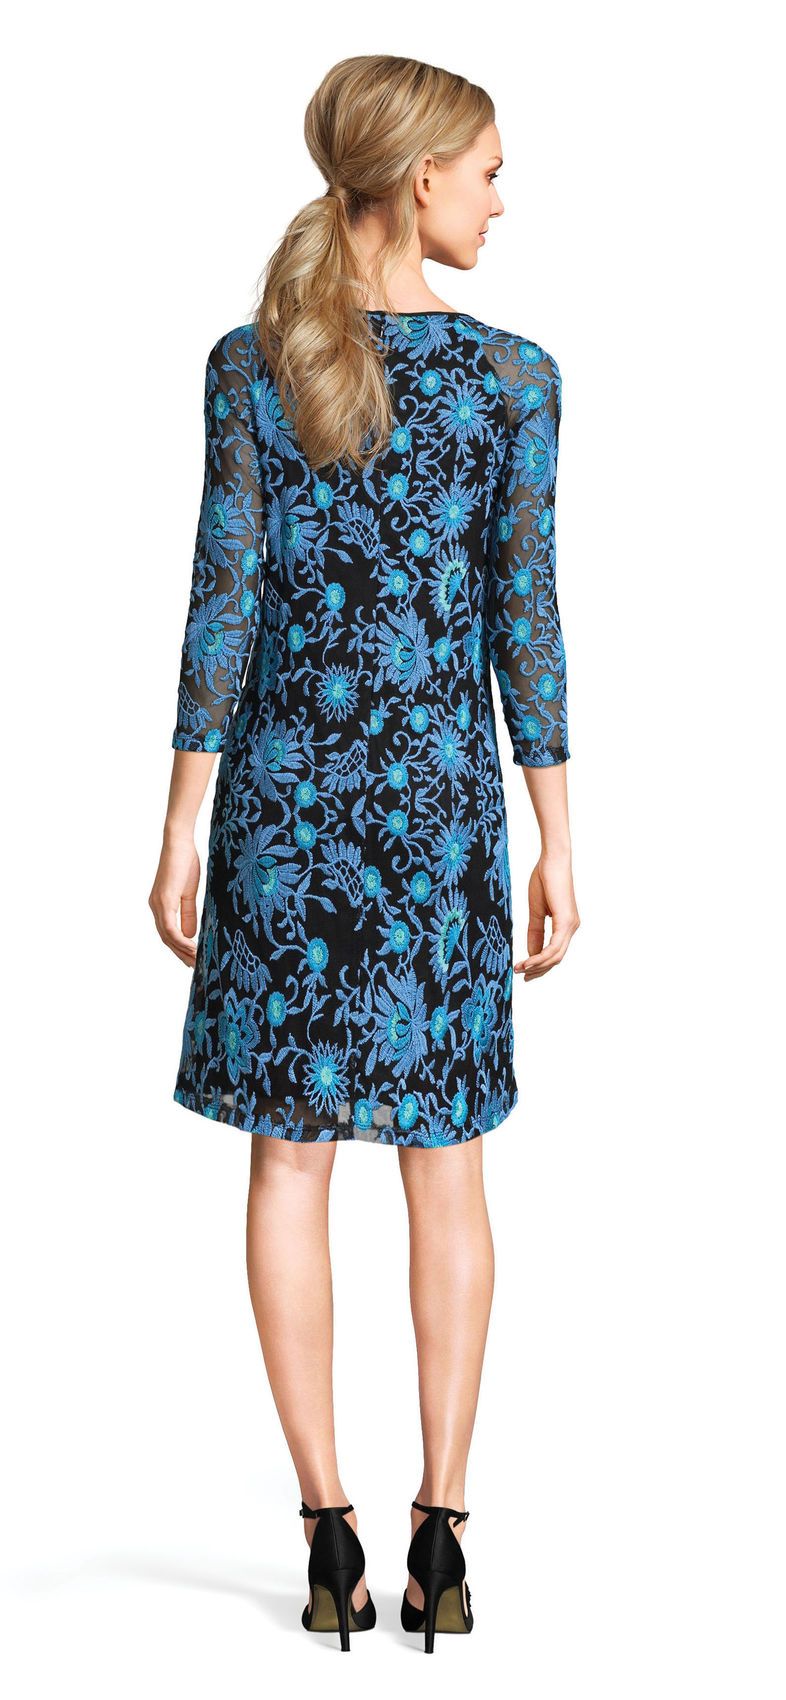 Adrianna Papell - AP1D100673 Embroidered Quarter Sleeve Sheath Dress In Blue